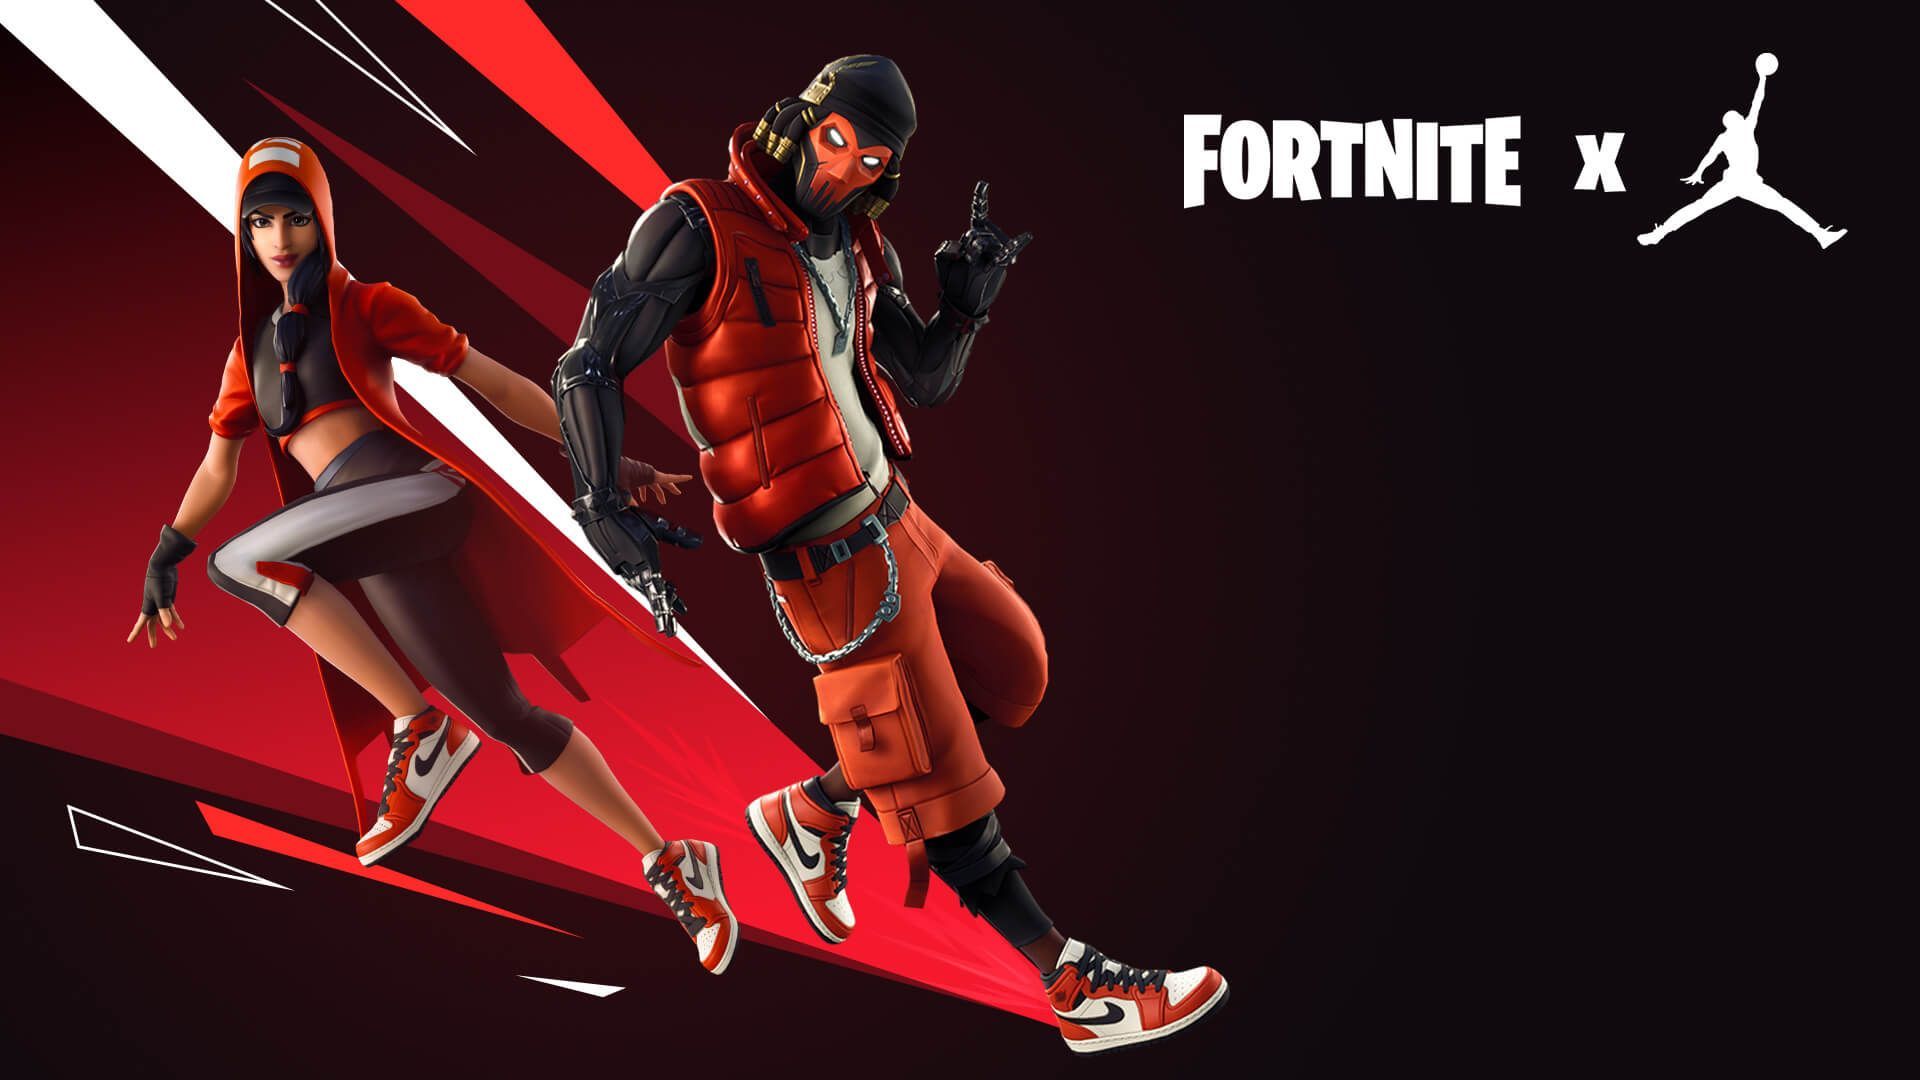 Show off your moves in the Downtown Drop LTM